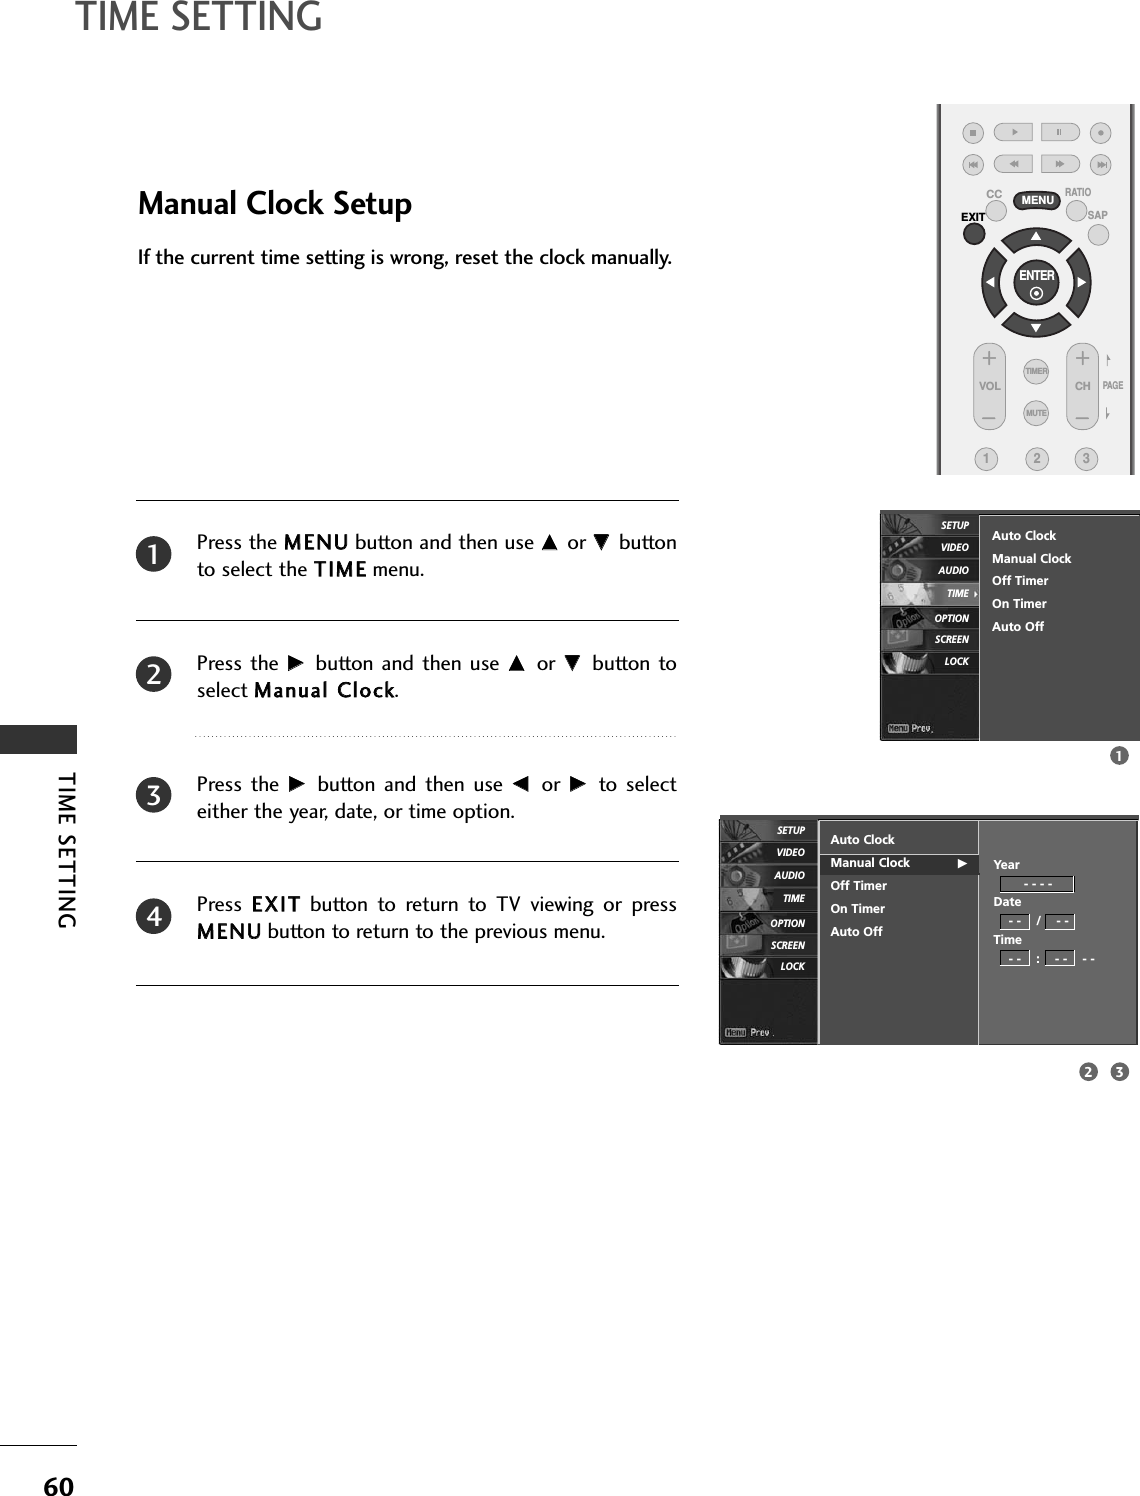 TIME SETTING60TIME SETTINGENTER EXITVOL CHCC MENU123MUTETIMERSAPRATIOPAG EManual Clock SetupPress the MMEENNUUbutton and then use DD  or EE  buttonto select the TTIIMMEEmenu.Press the  GG  button and then  use DD  or  EE  button  toselect MMaannuuaall  CClloocckk. Press  the  GG  button  and  then  use FF  or  GG  to  selecteither the year, date, or time option.Press  EEXXIITTbutton  to  return  to  TV  viewing  or  pressMMEENNUUbutton to return to the previous menu.If the current time setting is wrong, reset the clock manually.Auto ClockManual Clock GOff TimerOn TimerAuto OffYear- - - -Date- -    /    - -Time- -    :    - -    - -2341132Auto ClockManual ClockOff TimerOn TimerAuto OffSCREENLOCKOPTIONTIMEAUDIOVIDEOSETUPSCREENLOCKOPTIONTIMEAUDIOVIDEOSETUP